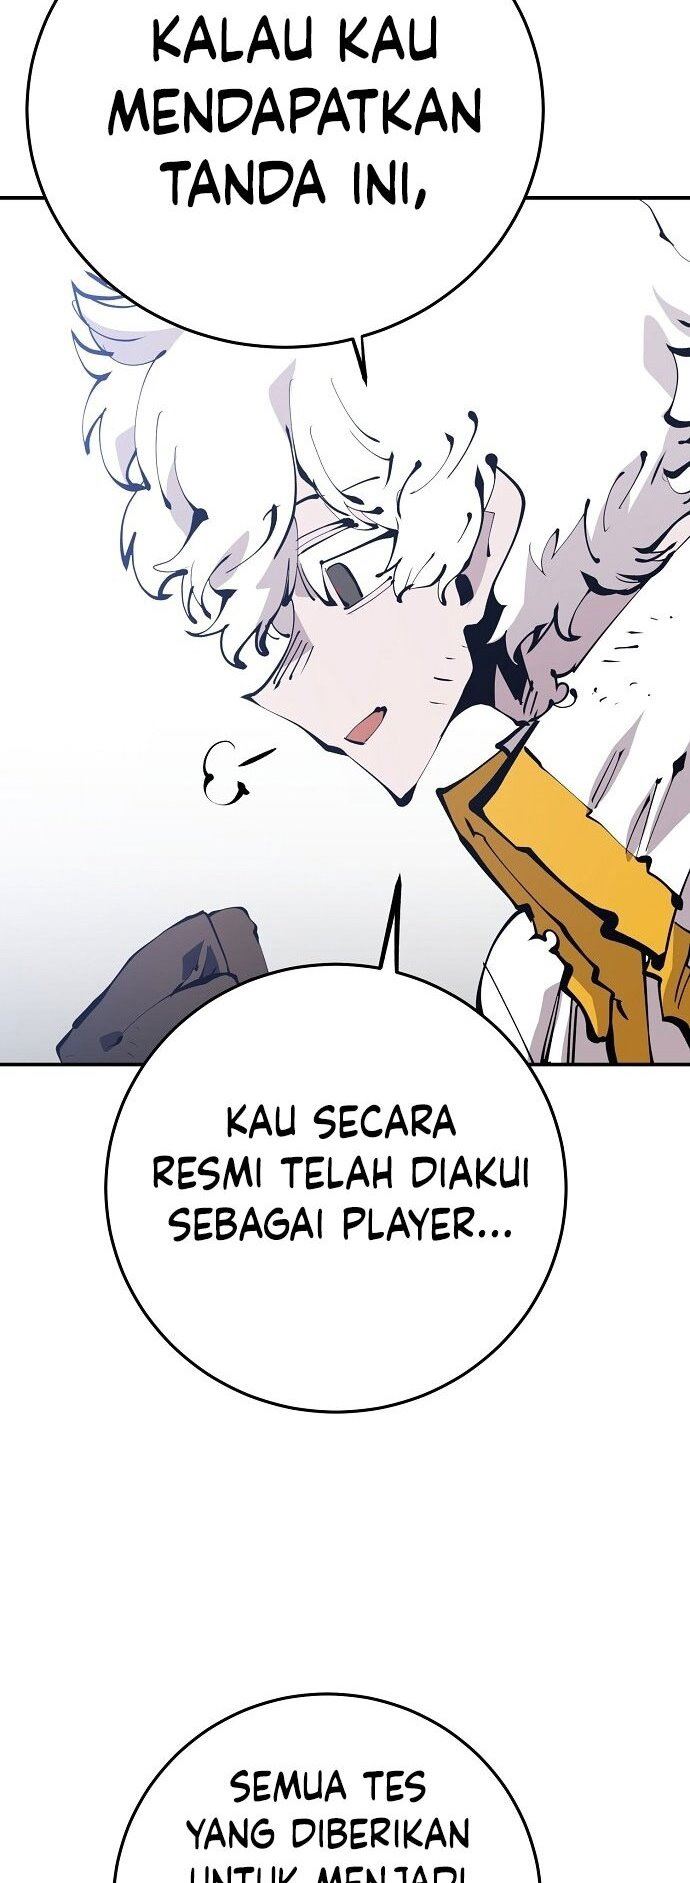 Player Chapter 70